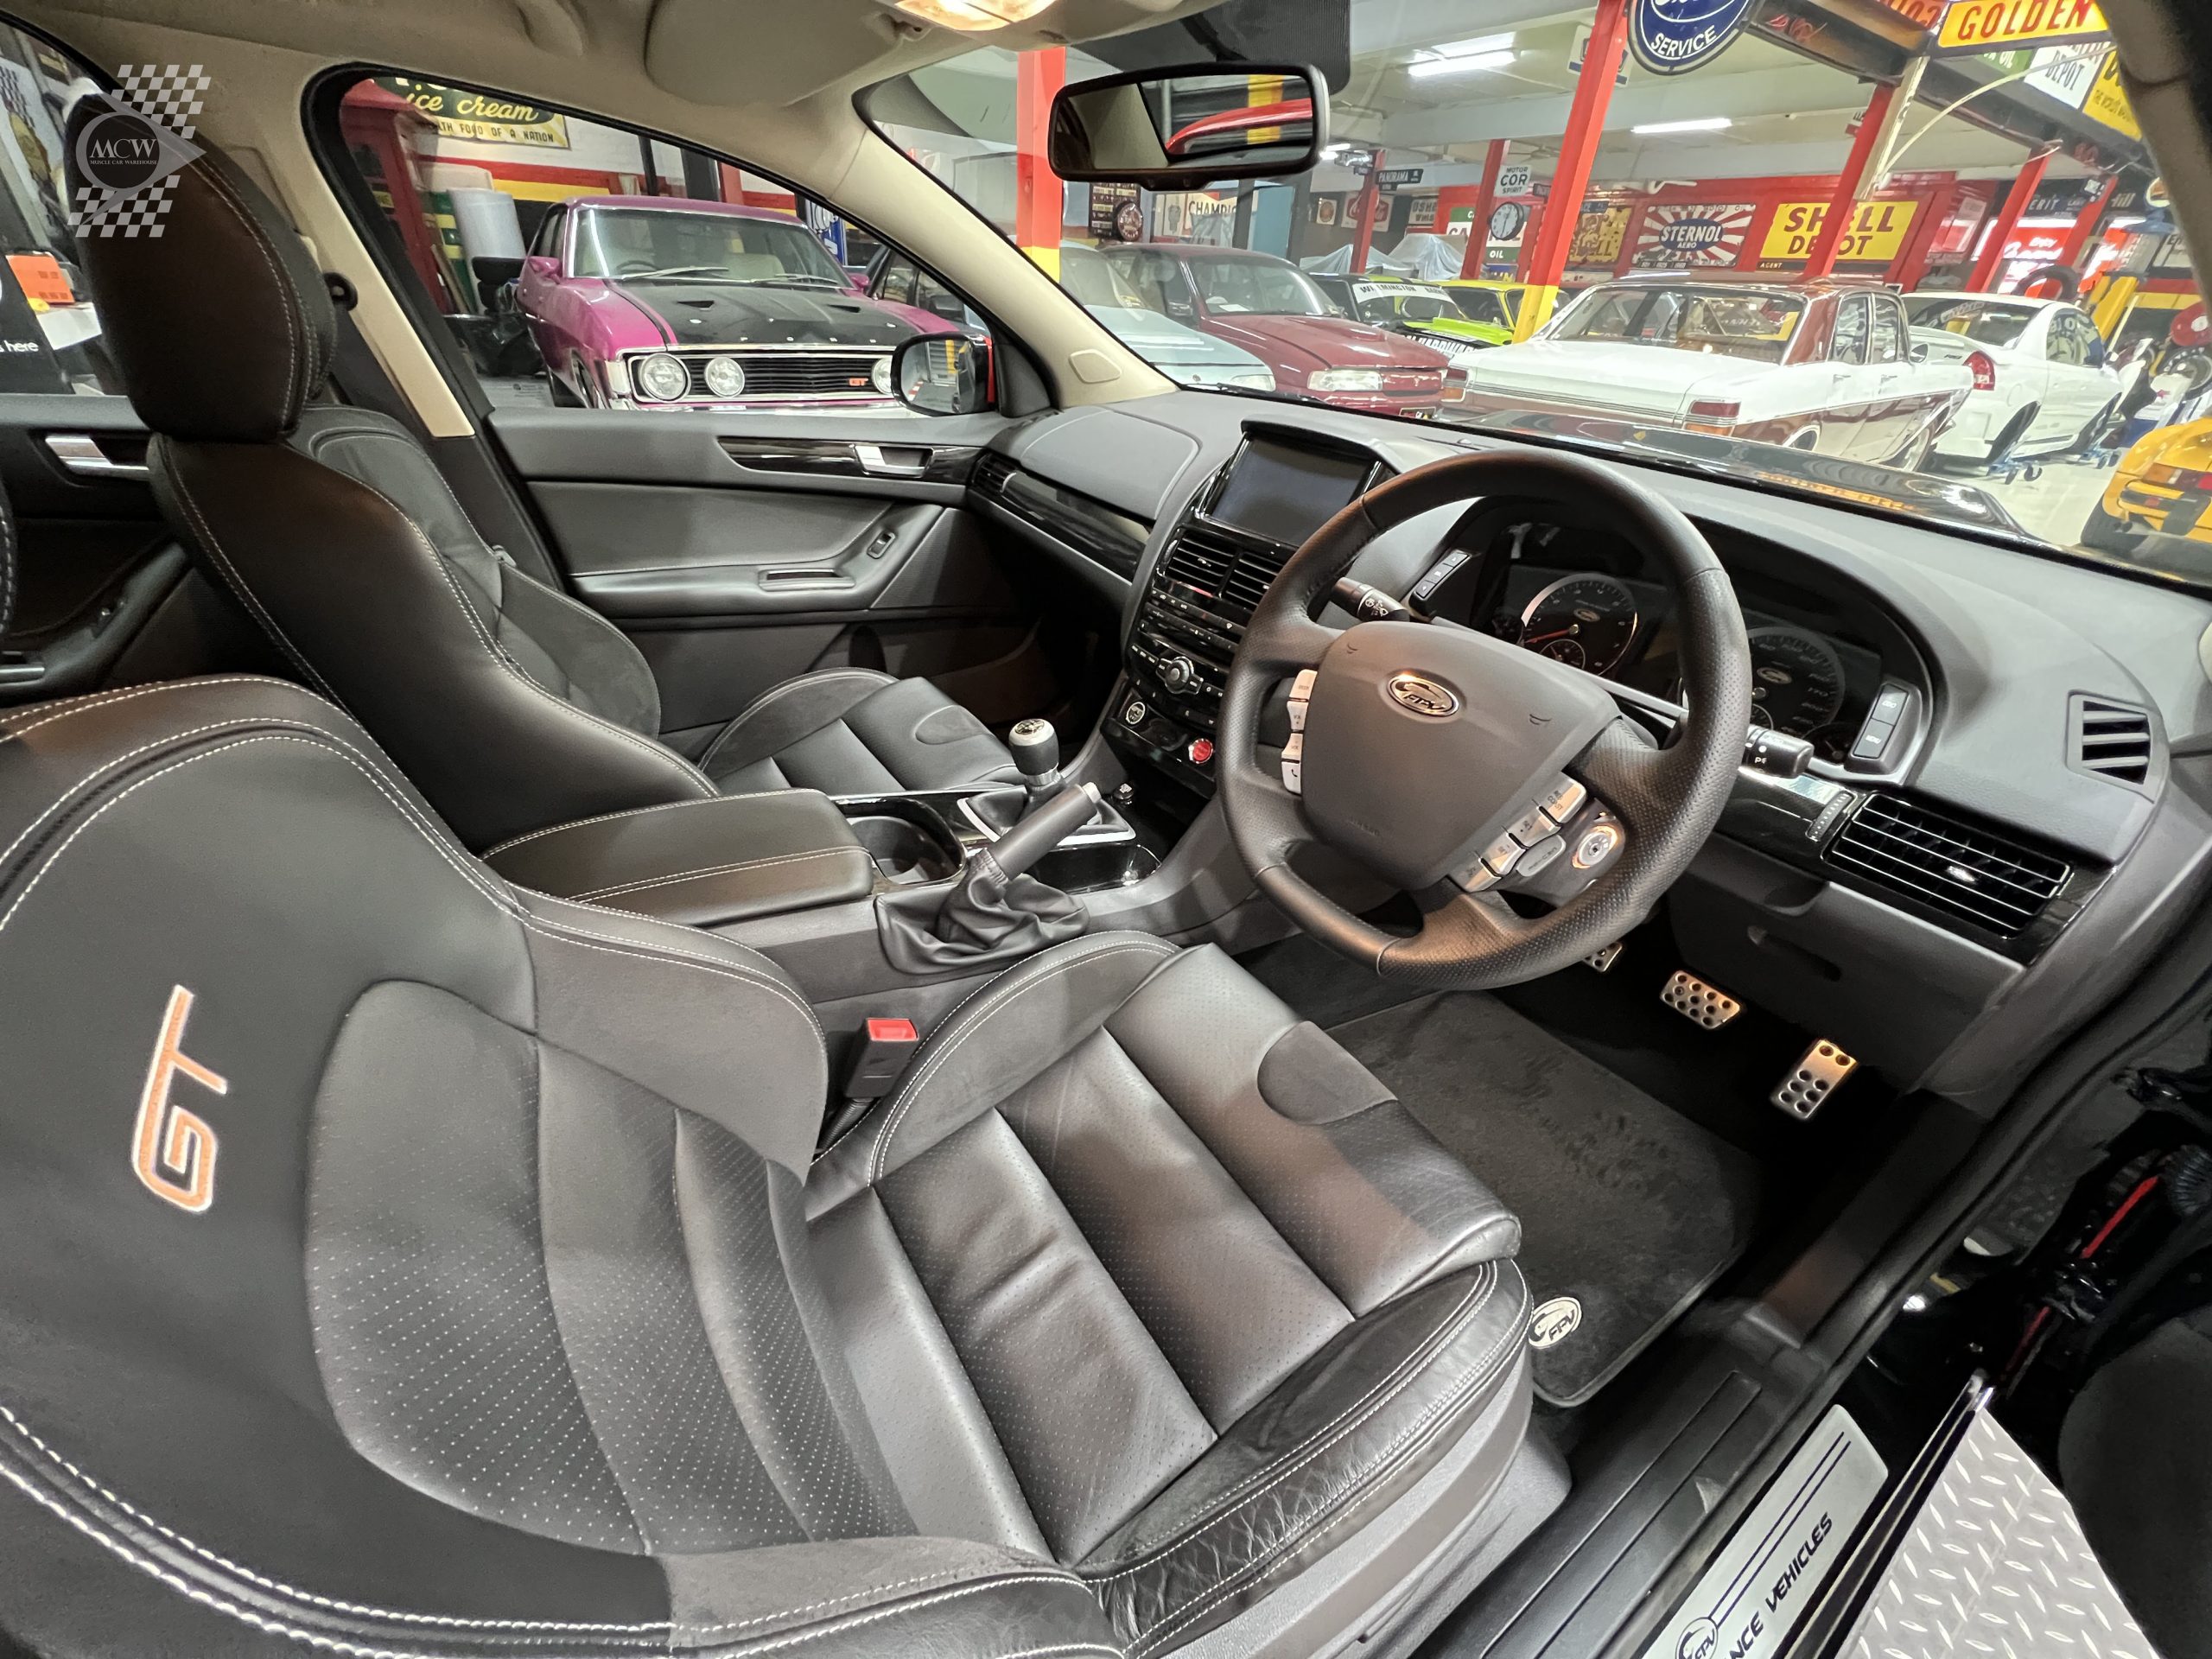 2012 Ford FG FPV GT R-Spec Interior - Muscle Car Warehouse